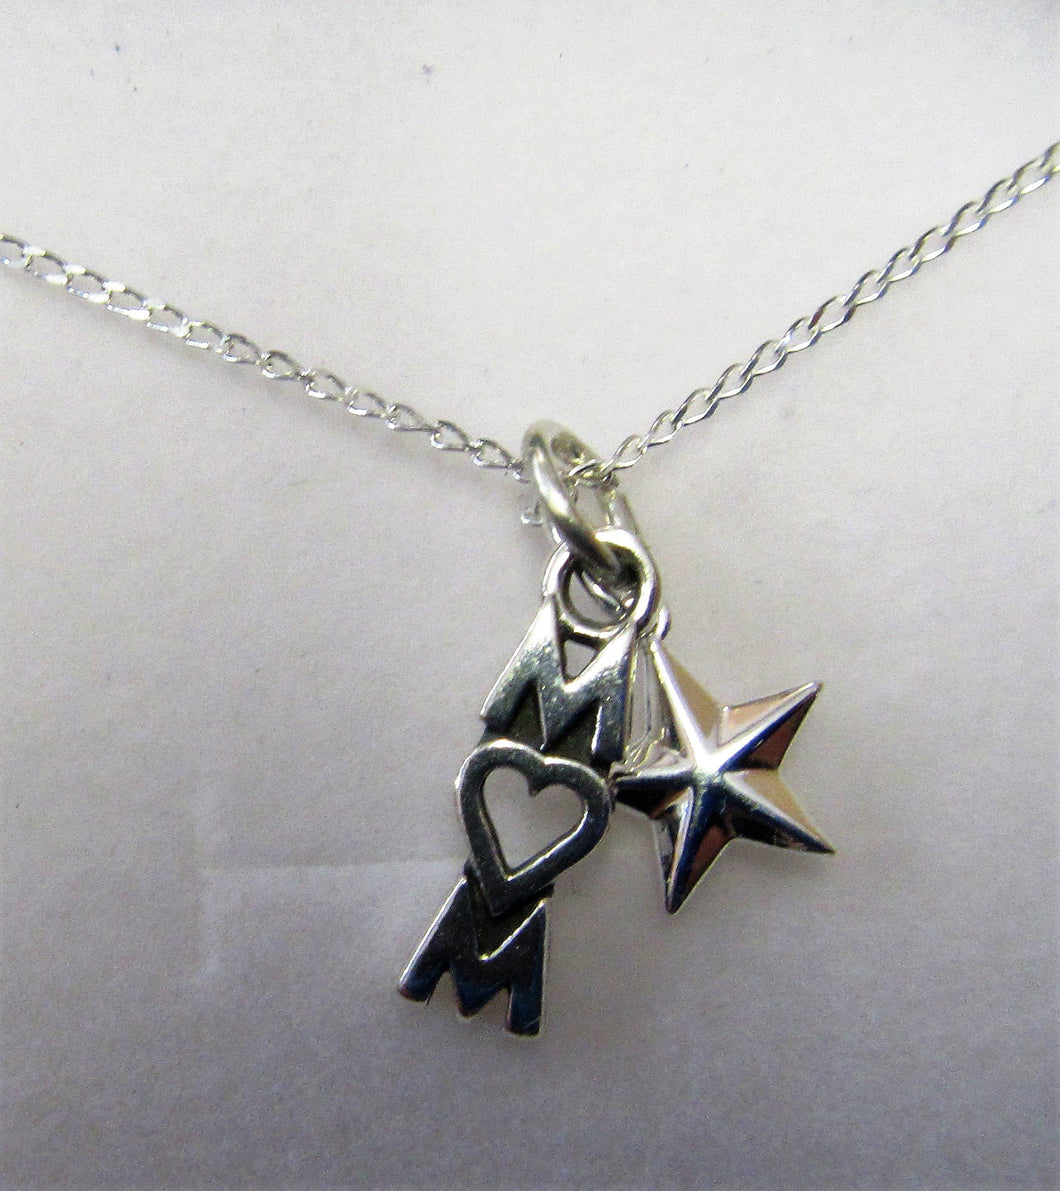 Beautiful handcrafted sterling silver necklace with Mum and star charm